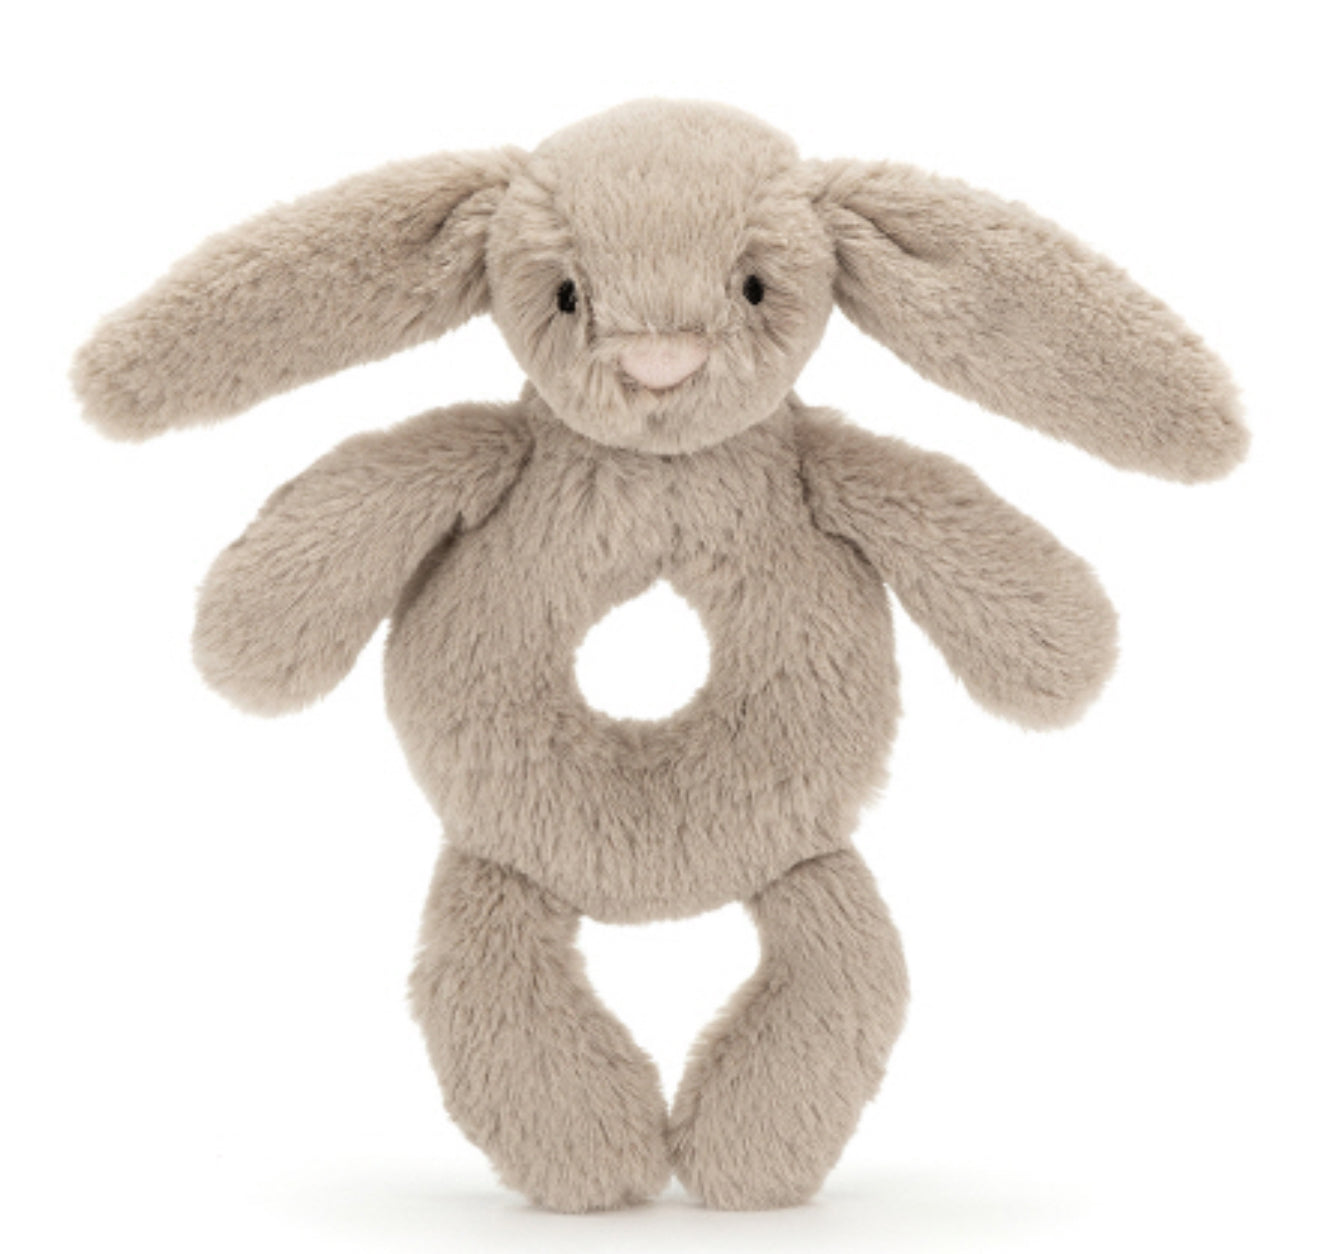 Jellycat Baby Bashful Beige Bunny Ring Rattle  (RECYCLED FIBERS)